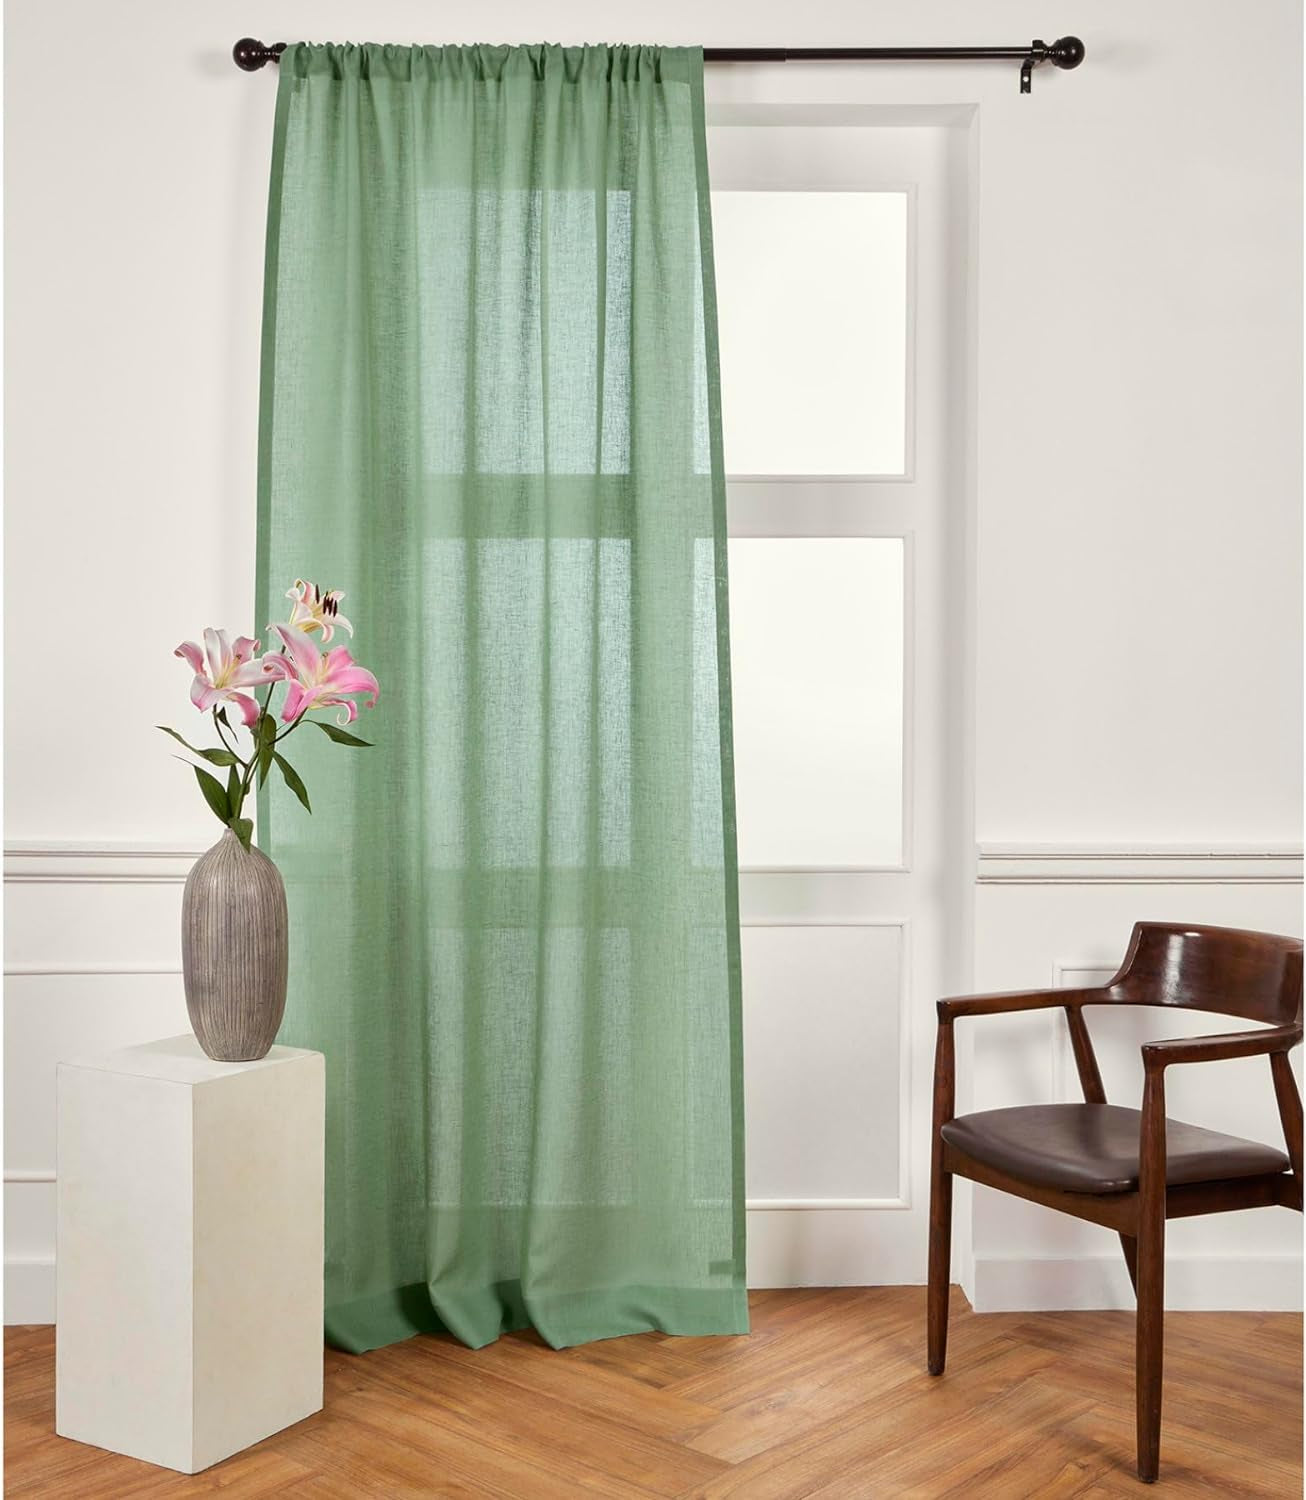 Solino Home Linen Sheer Curtain – 52 X 45 Inch Light Natural Rod Pocket Window Panel – 100% Pure Natural Fabric Curtain for Living Room, Indoor, Outdoor – Handcrafted from European Flax  Solino Home Aspen Green 52 X 63 Inch 